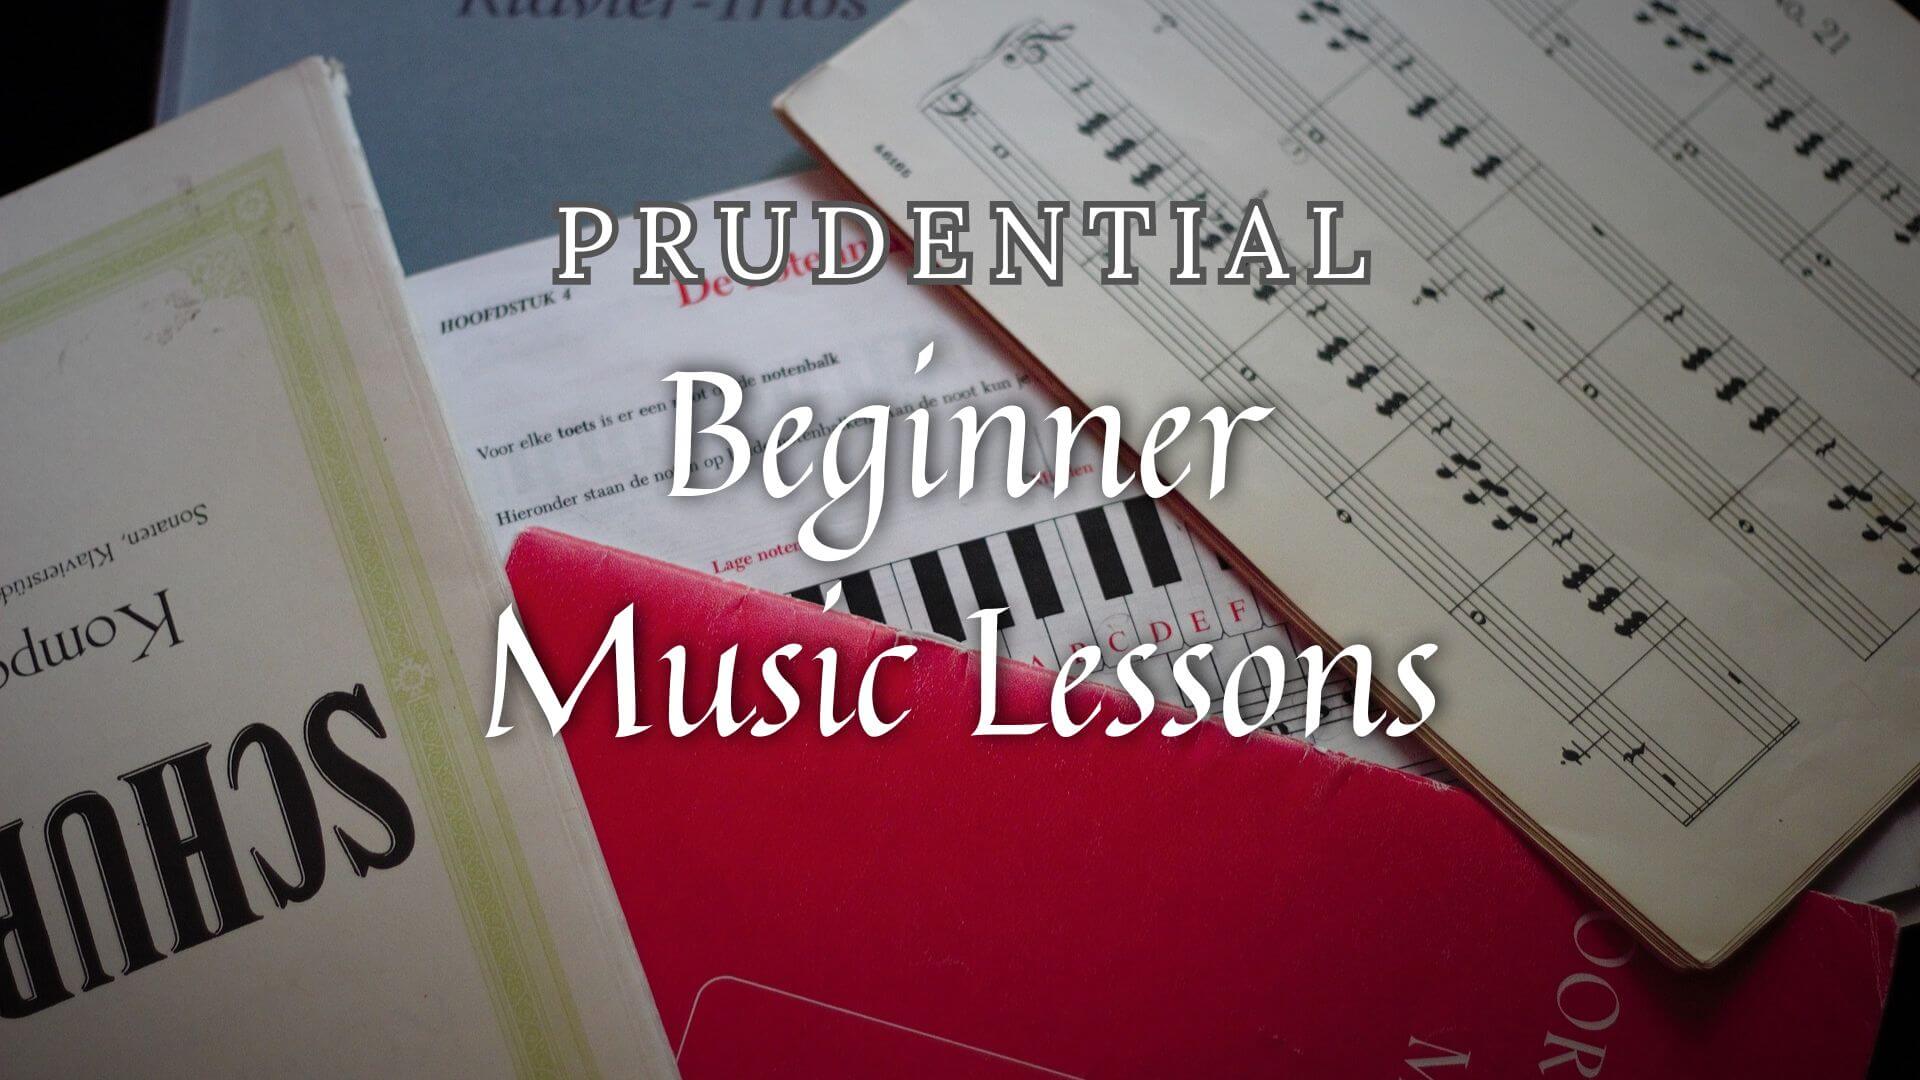 Welcome to Prudential: Beginner-Friendly Music Classes at Musicians Playground